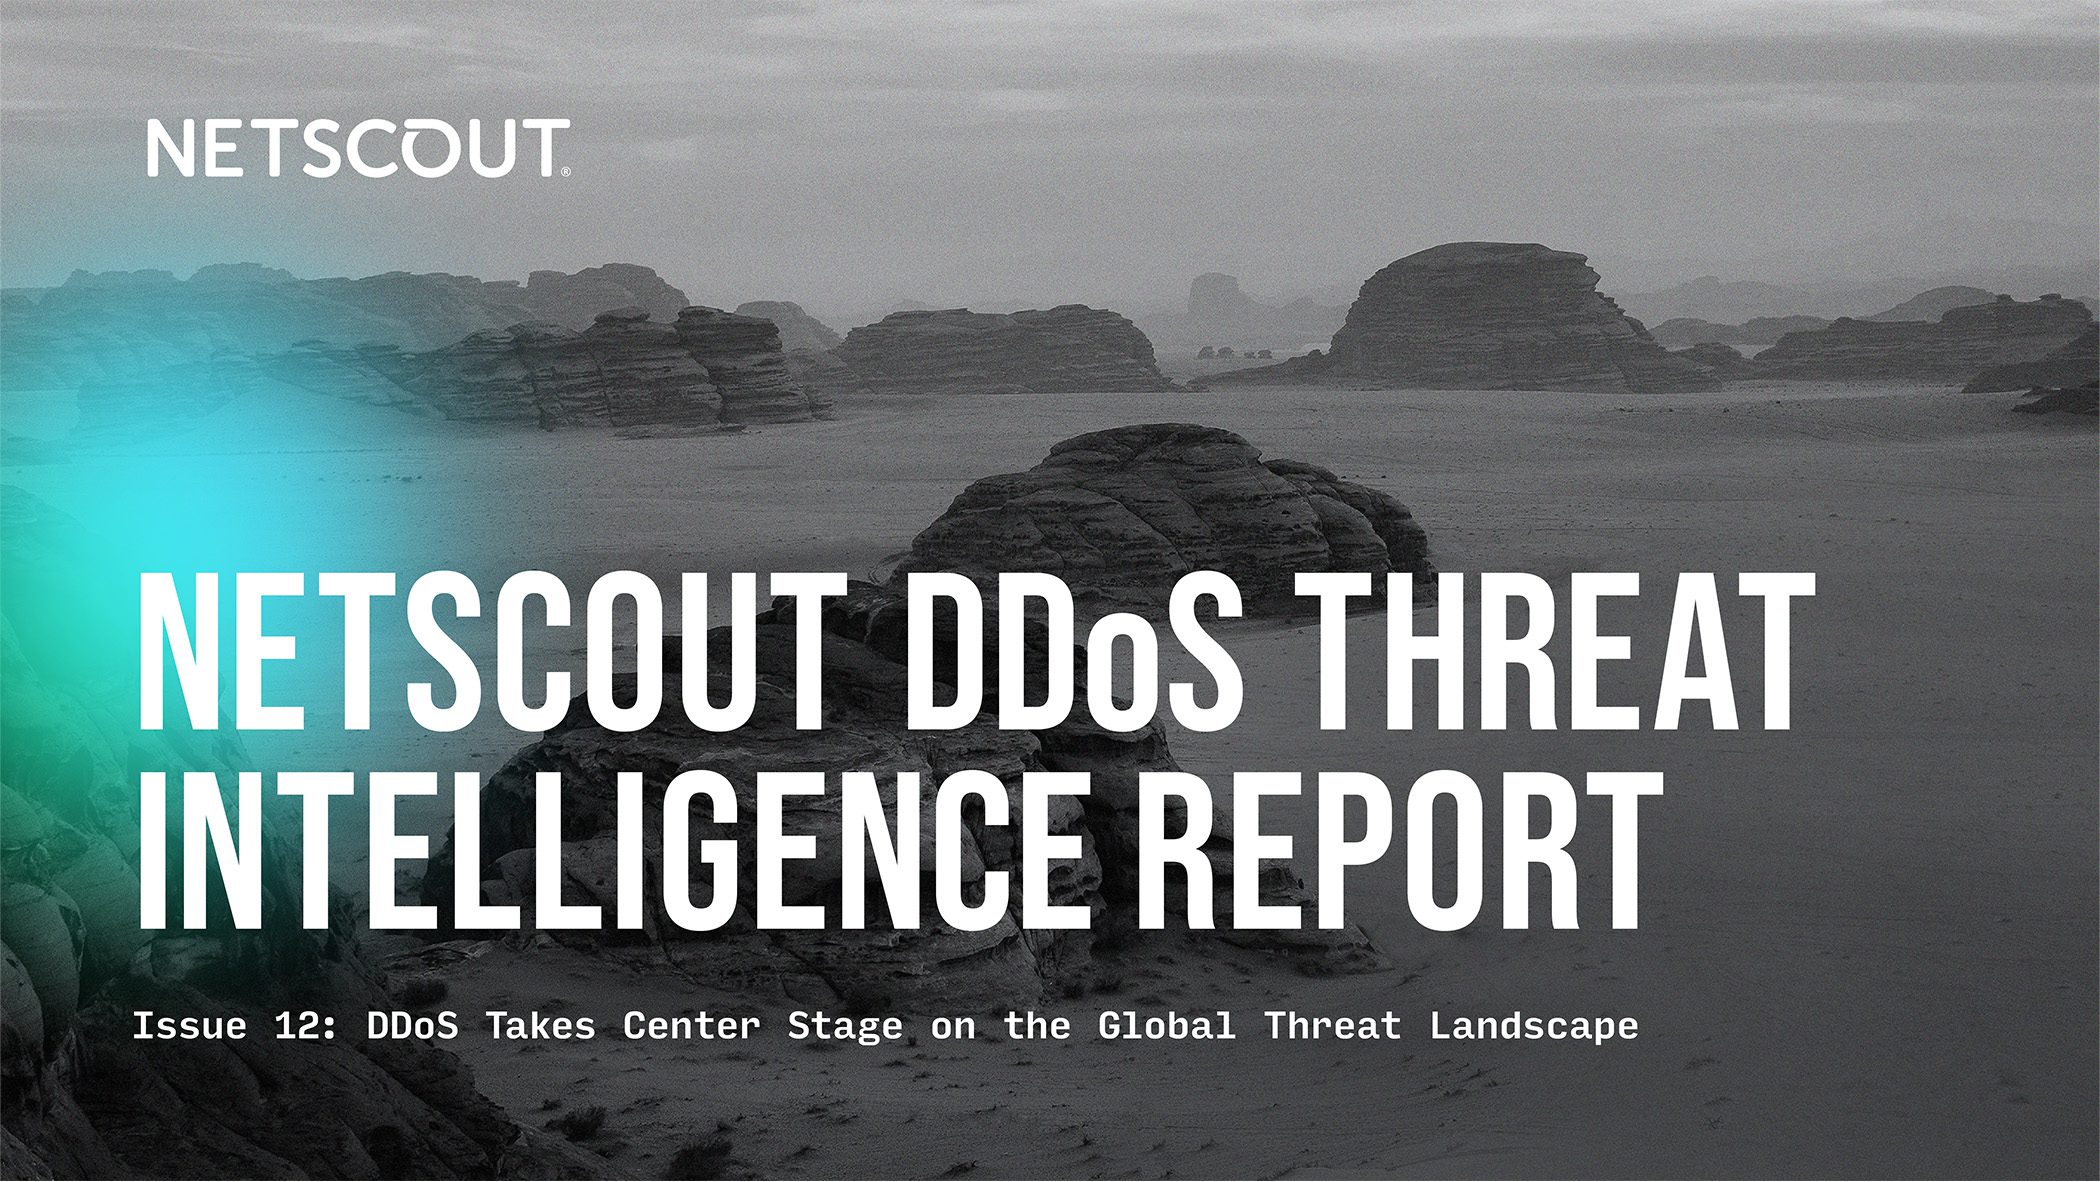 Saint Vincent and the Grenadines - Latest Cyber Threat Intelligence Report